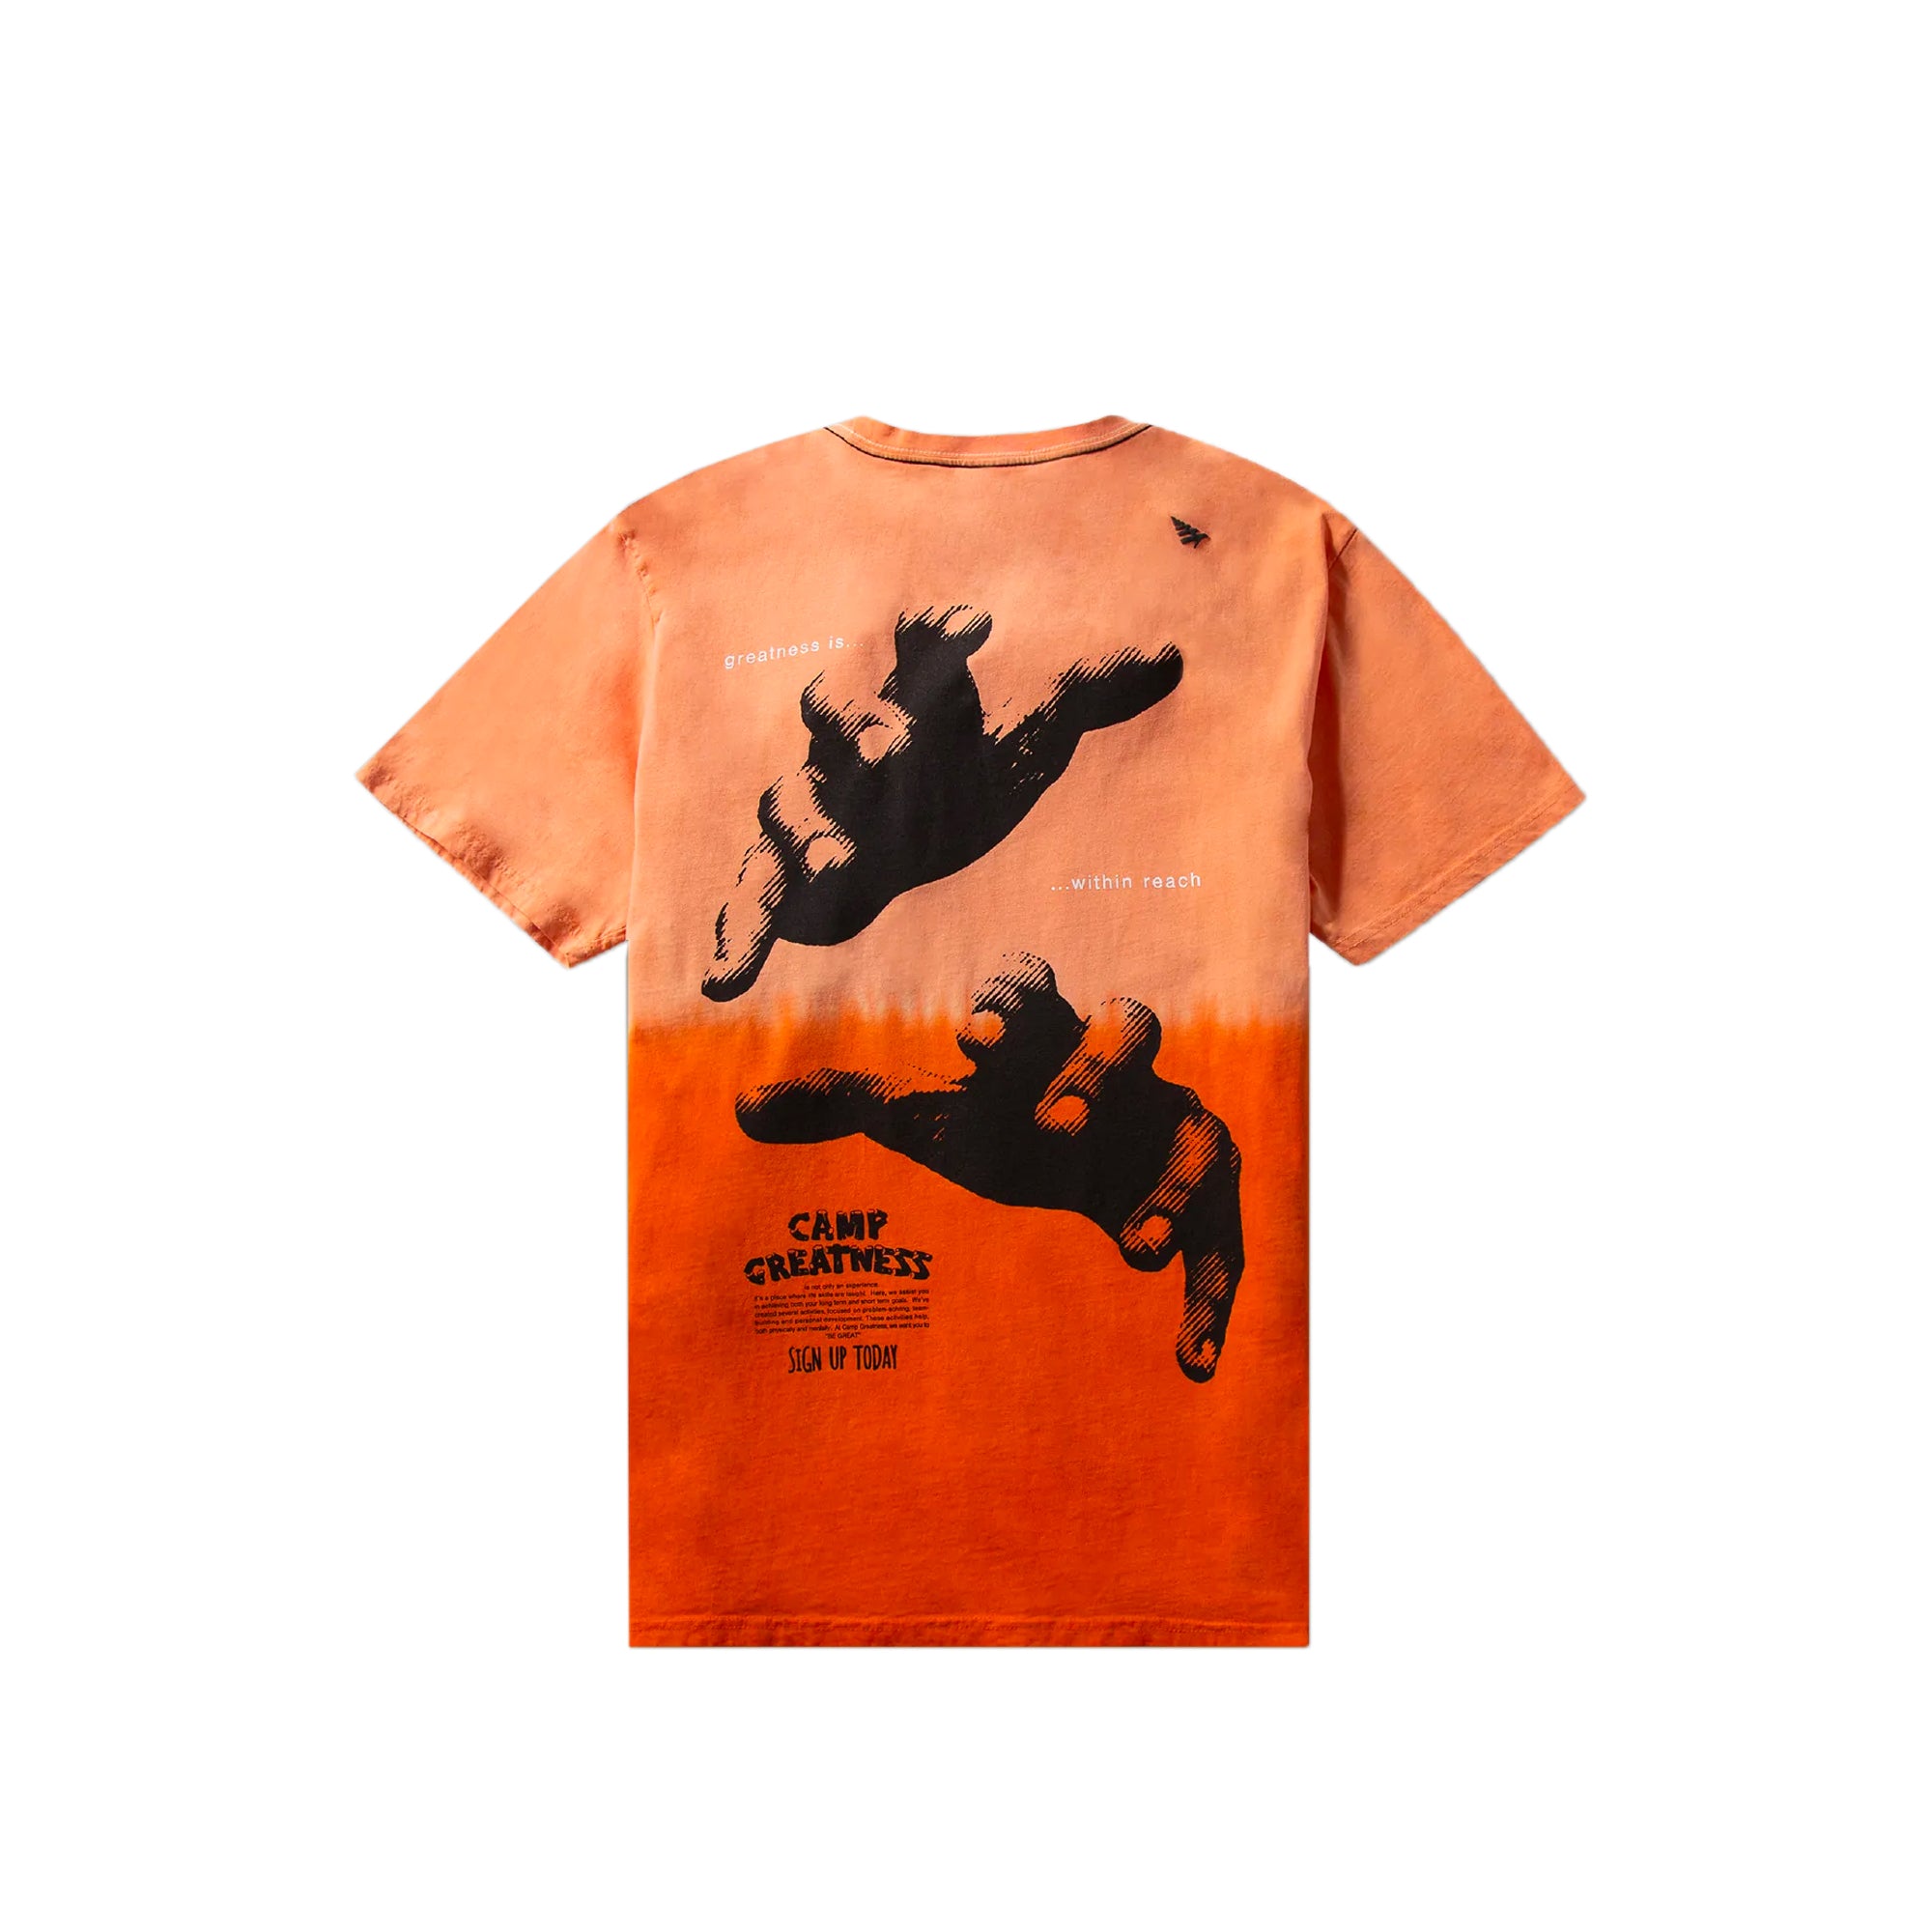 Paper Planes Mens Greatness Within Reach SS Tee